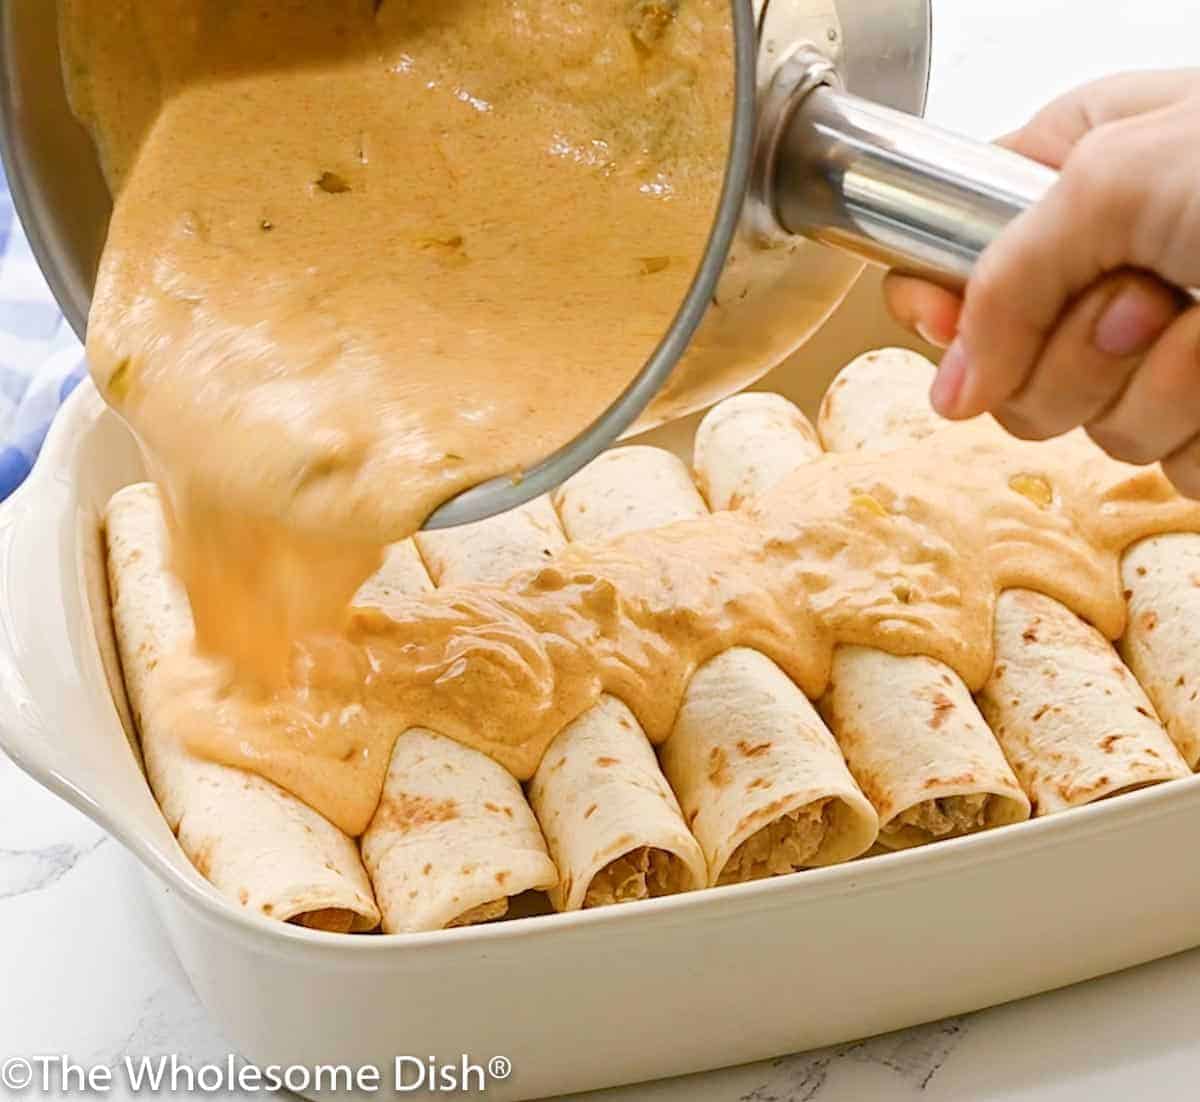 Baking dish full of rolled up chicken enchilada with sour cream sauce being poured over it.